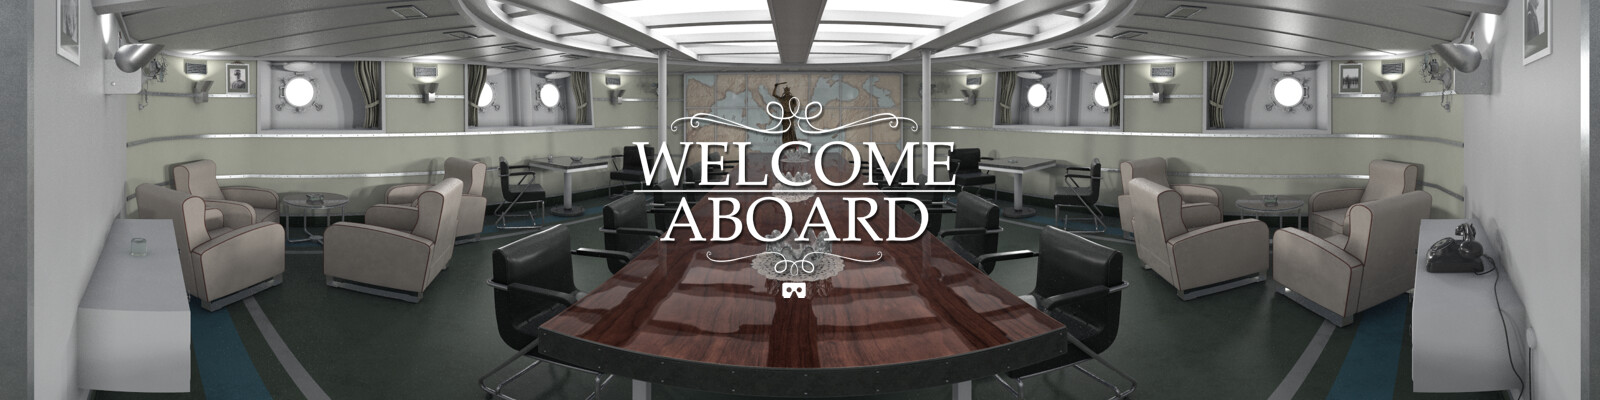 WELCOME ABOARD